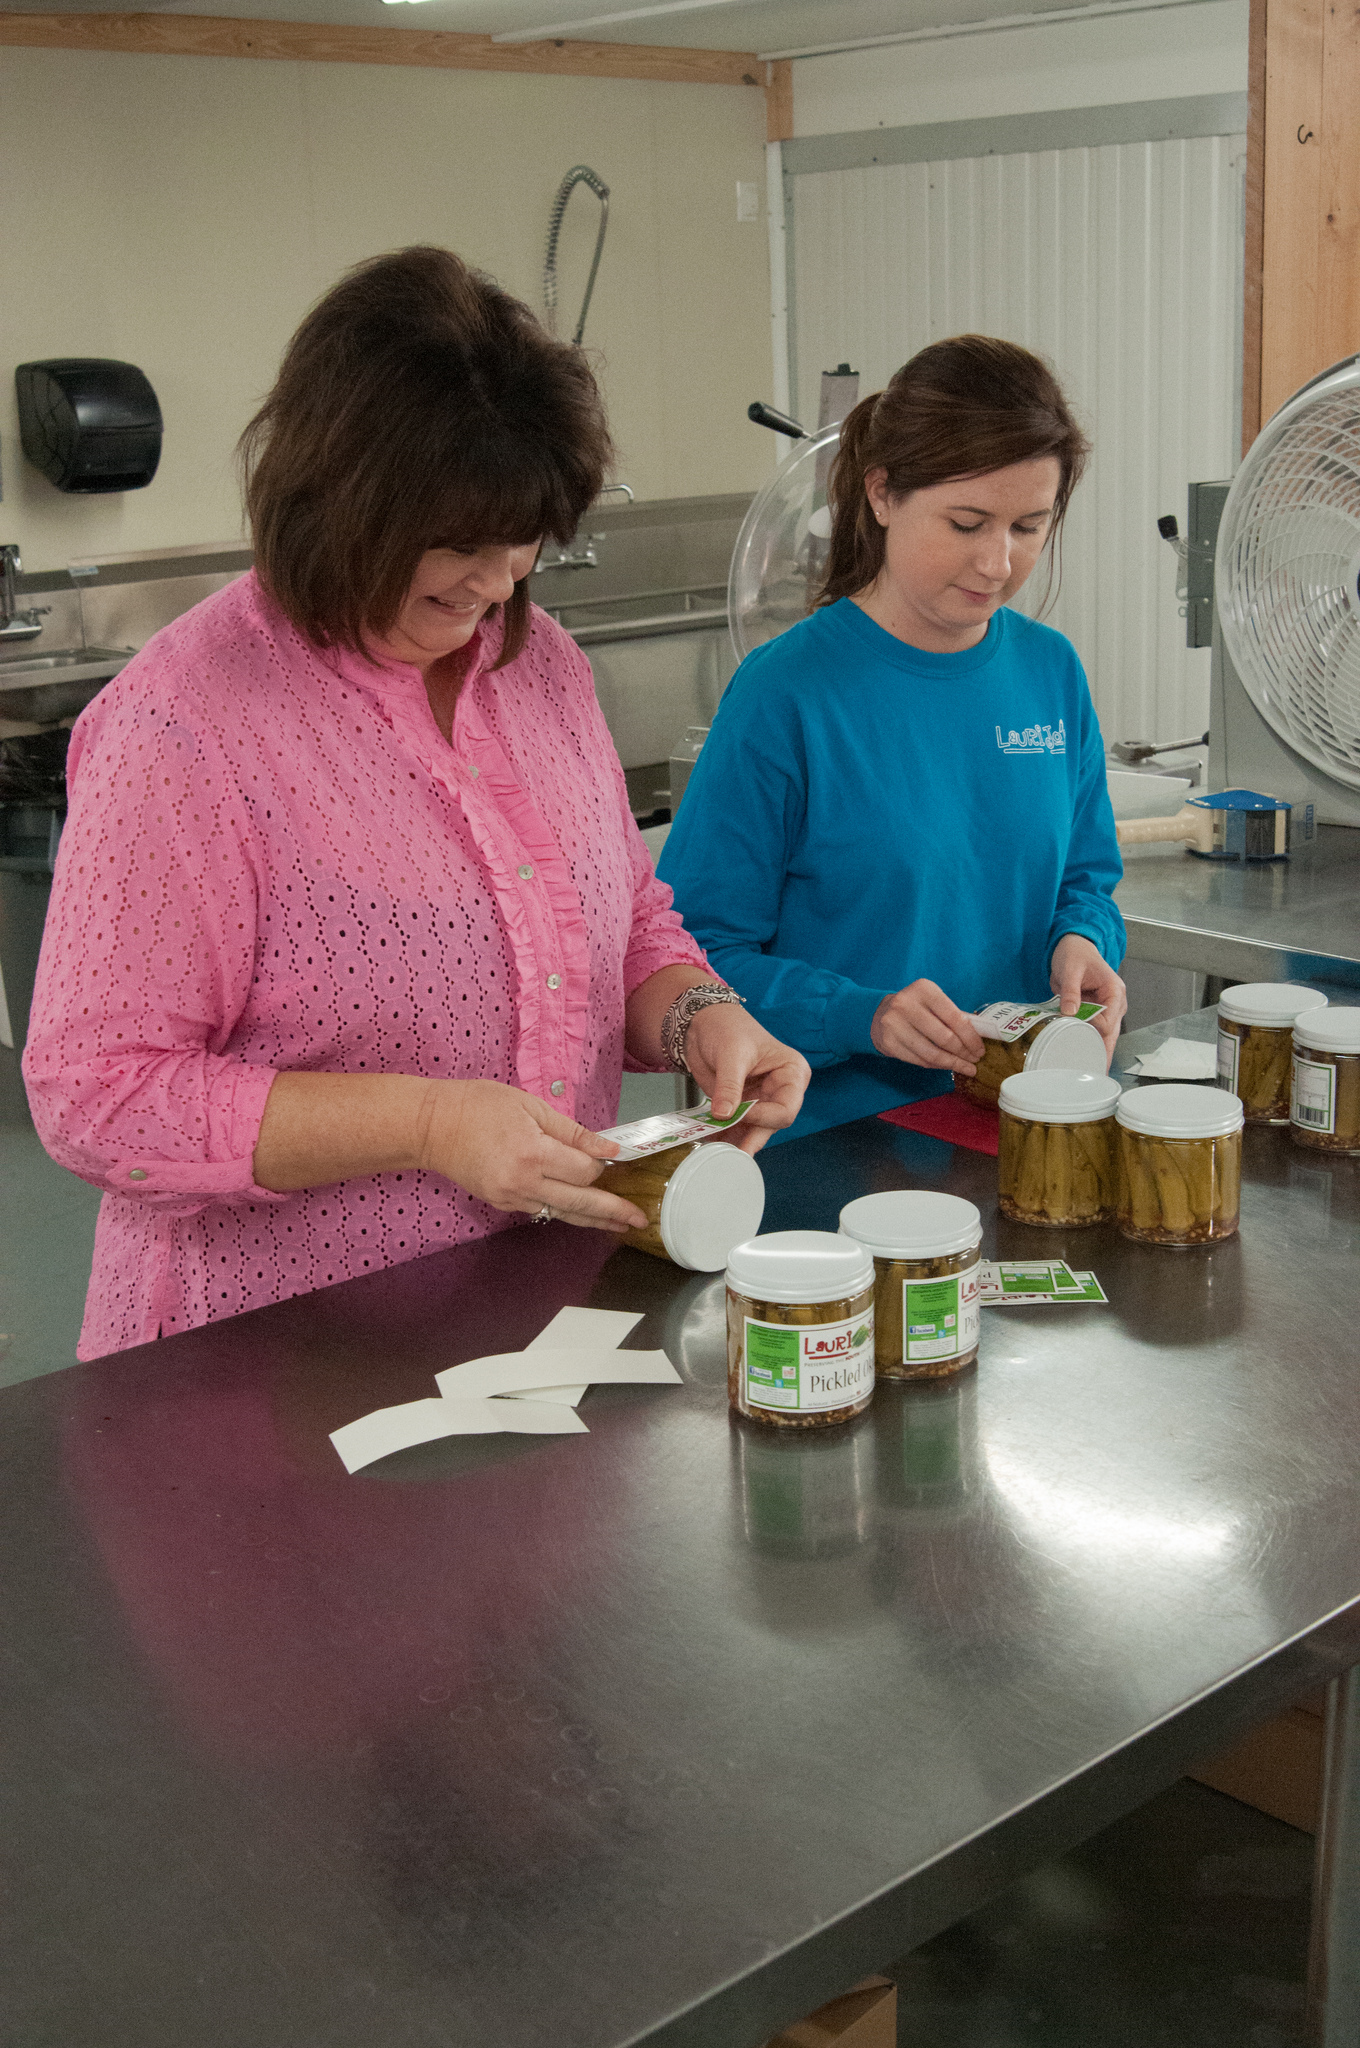 a mother and daughter putting labels on home-canned food products. Photo by Stephen Ausmus, USDA